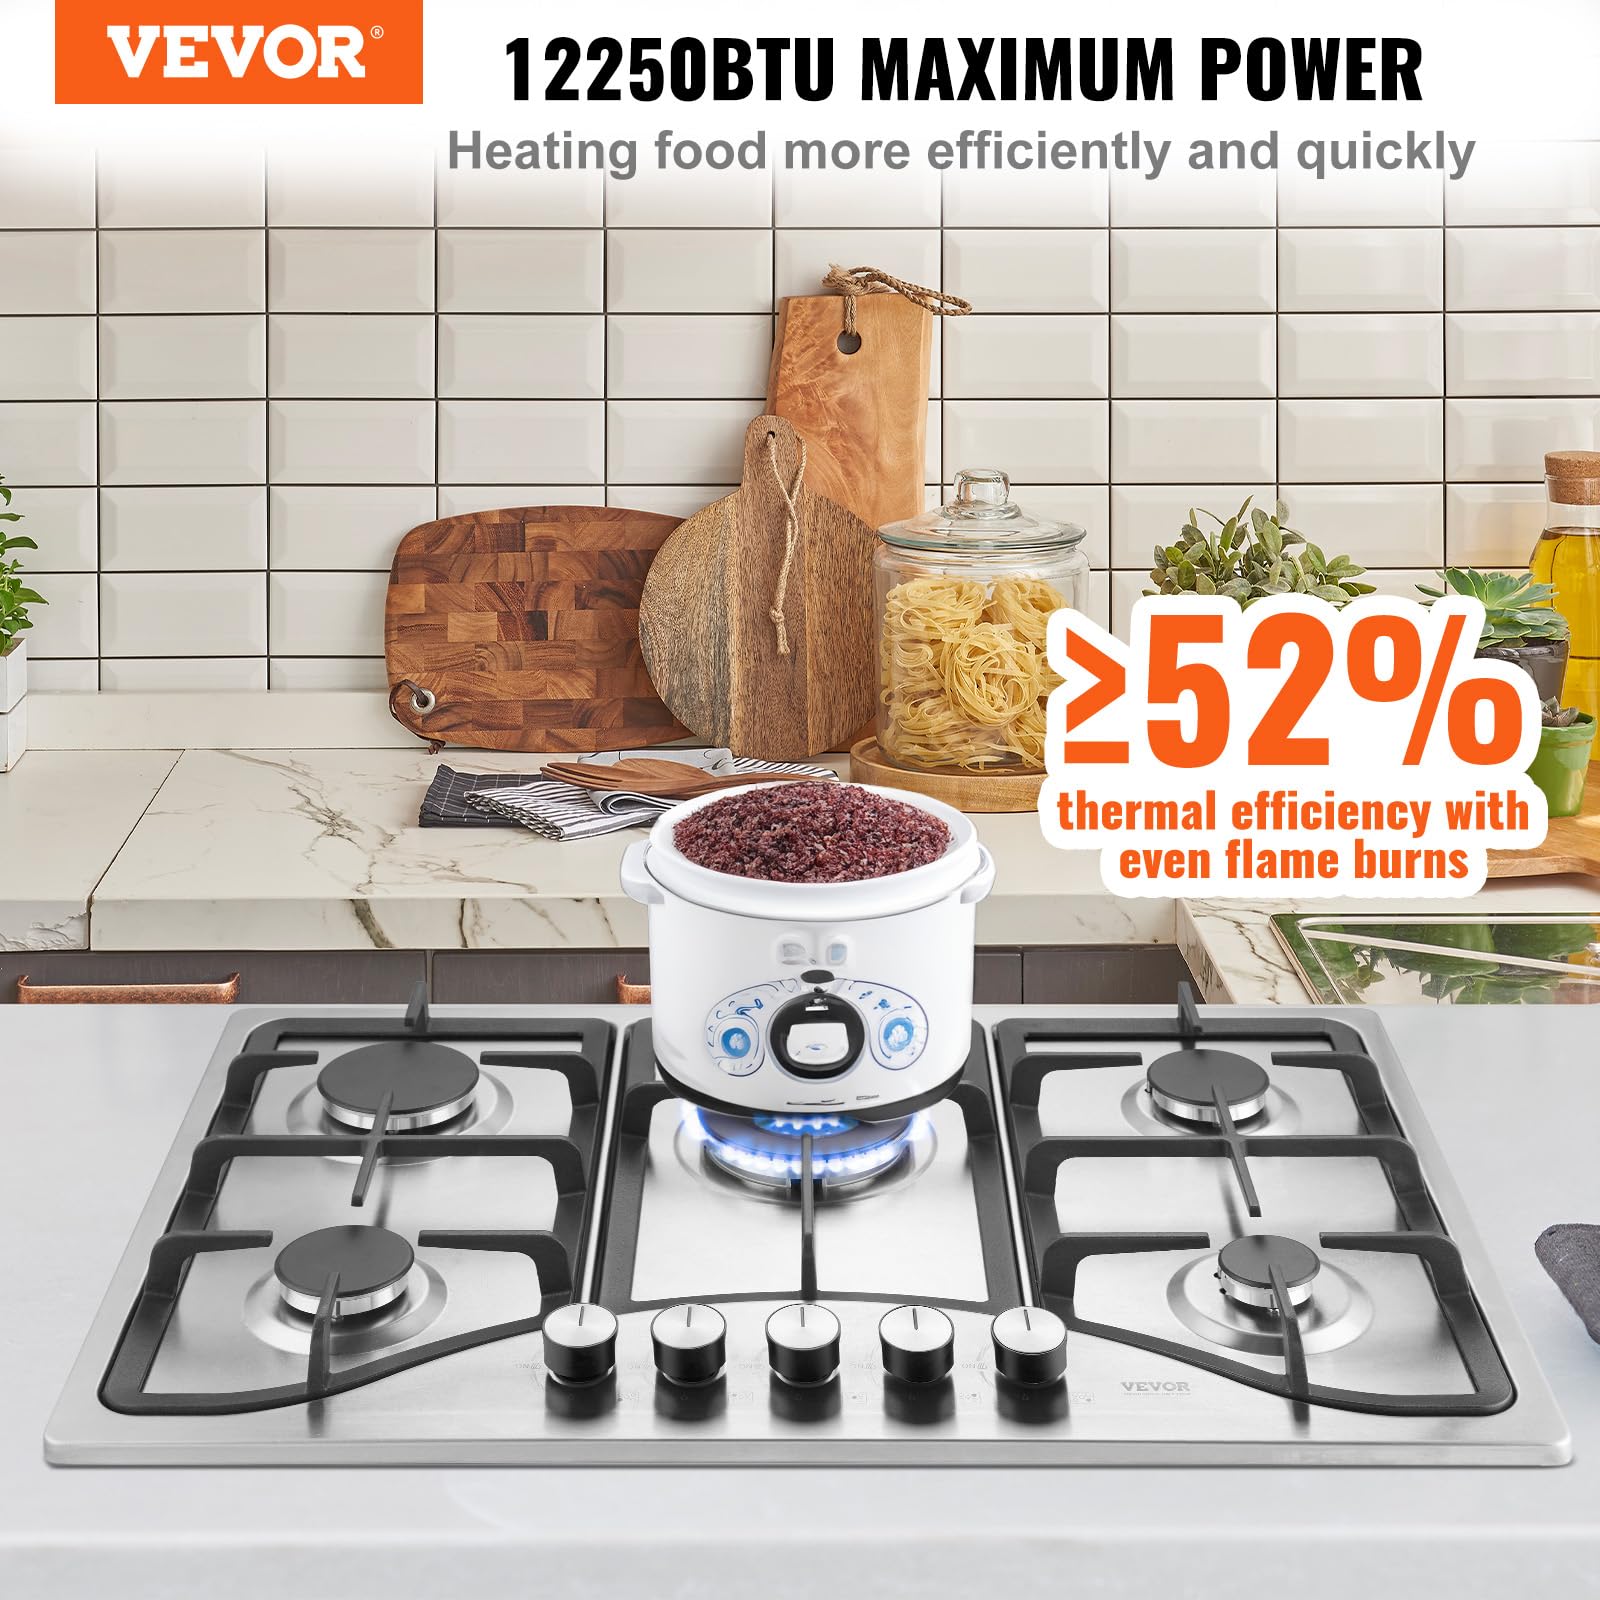 VEVOR 30-inch Gas Cooktop, 5 Burners Built-in Gas Stove Top, Max 12250BTU NG/LPG Convertible Stainless Steel Natural Gas Hob, with Thermocouple Protection for Camping, RV, Apartment